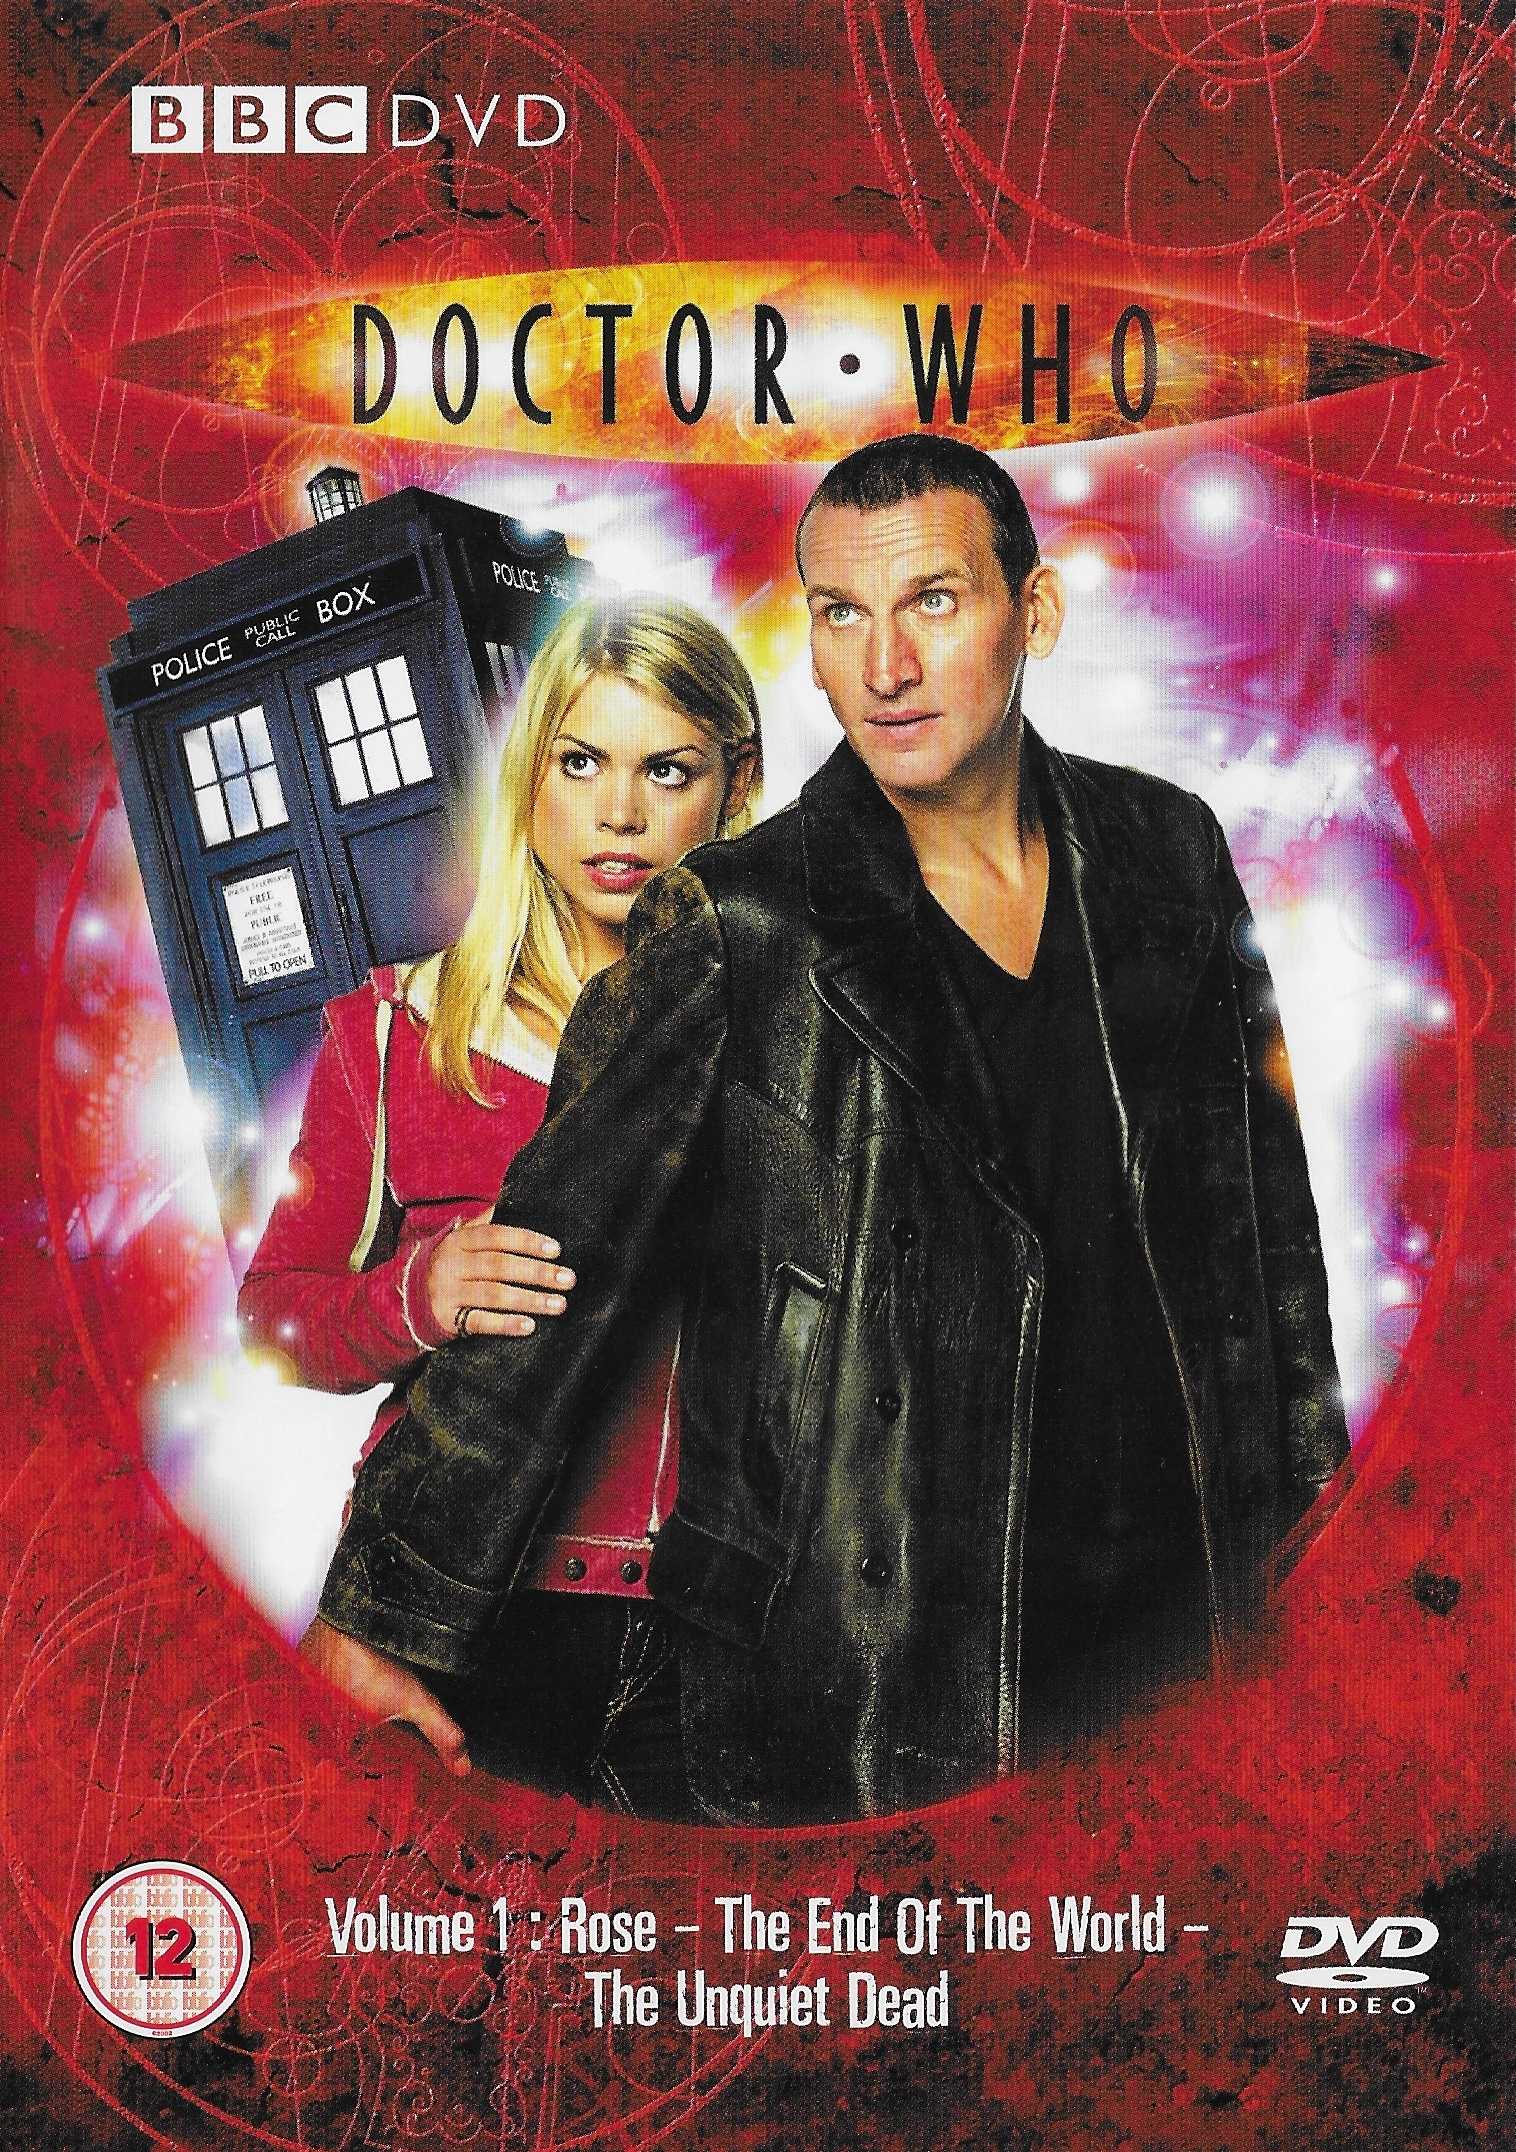 Picture of BBCDVD 1755 Doctor Who - New series, volume 1 by artist Russell T Davies / Mark Gatiss from the BBC records and Tapes library